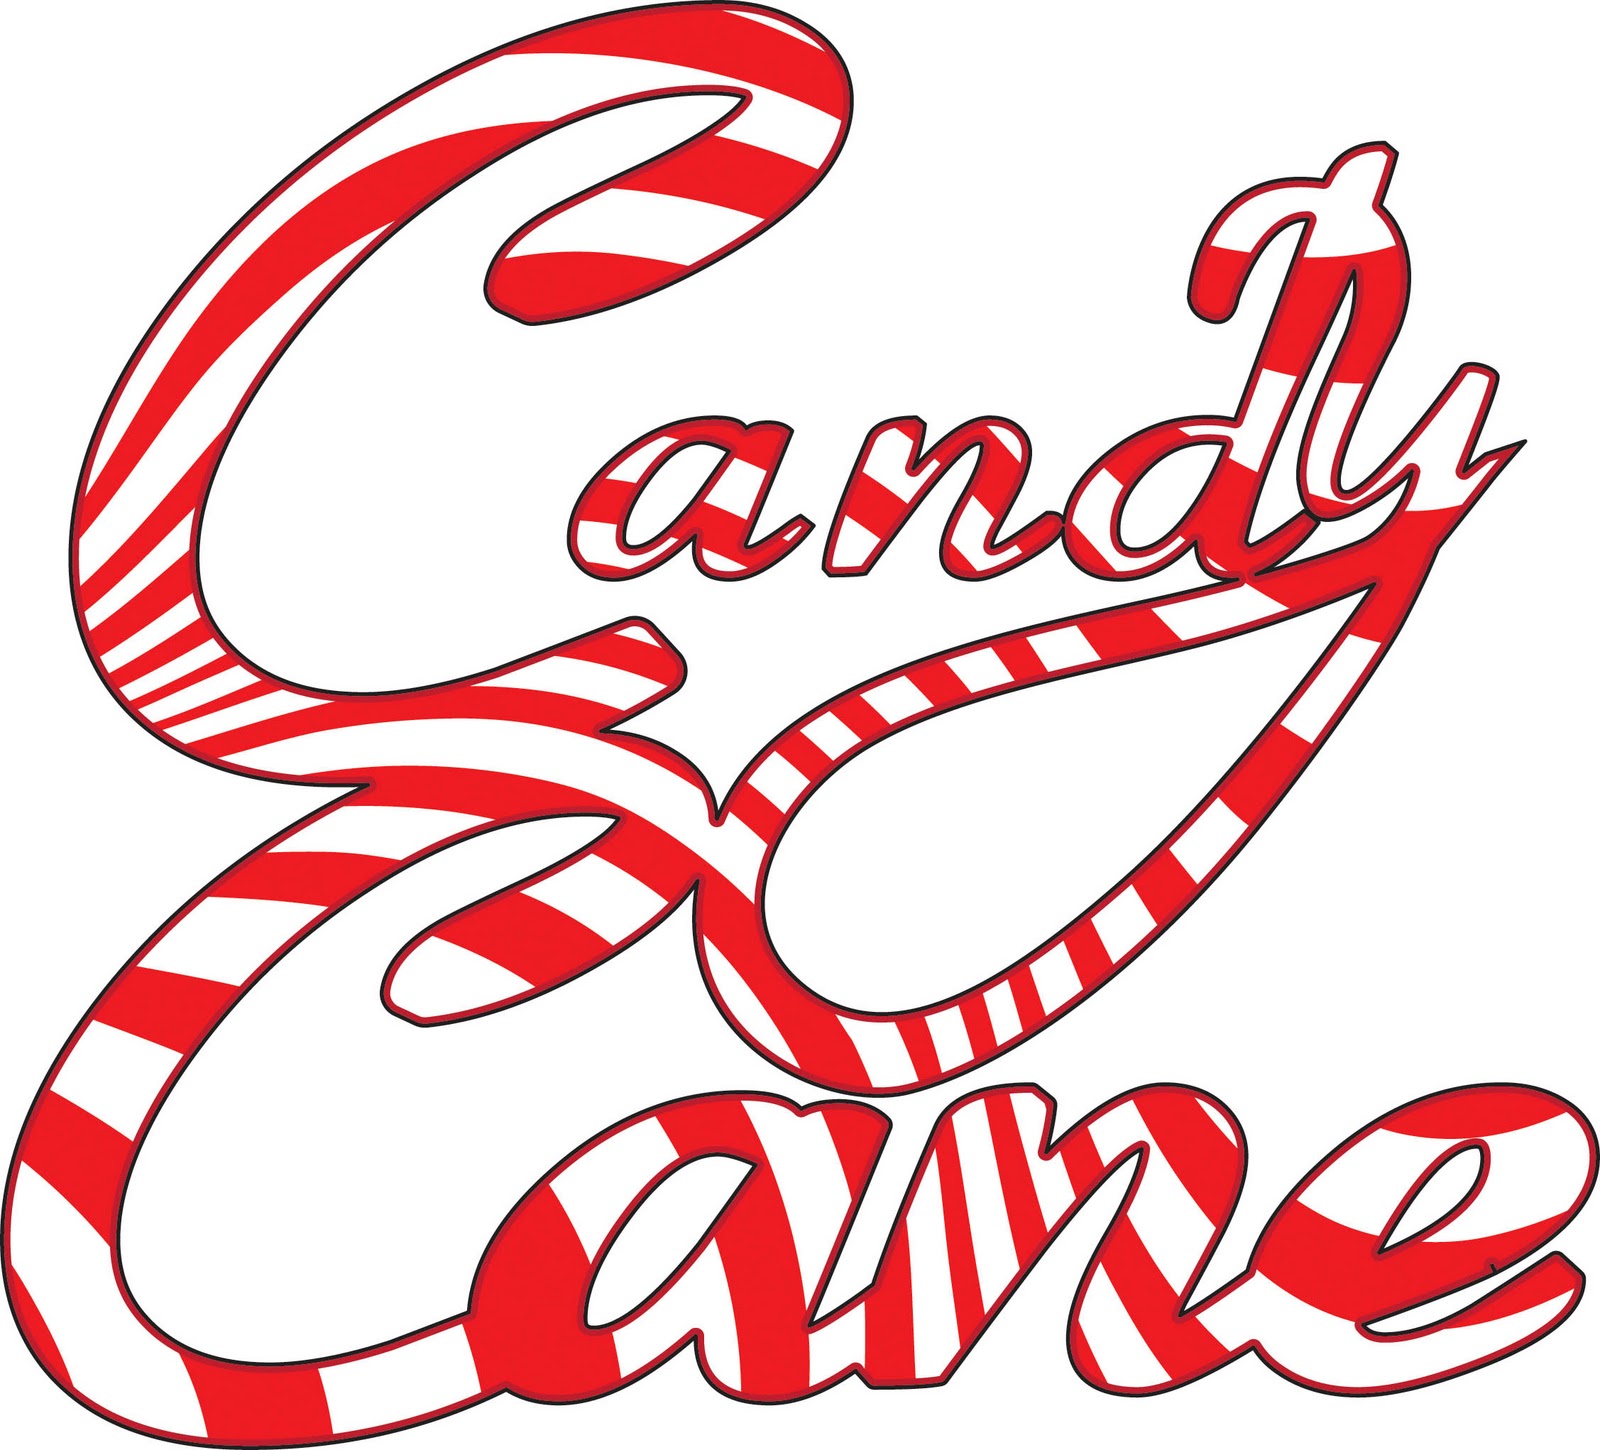 Candy Cane Clipart - ClipArt Best